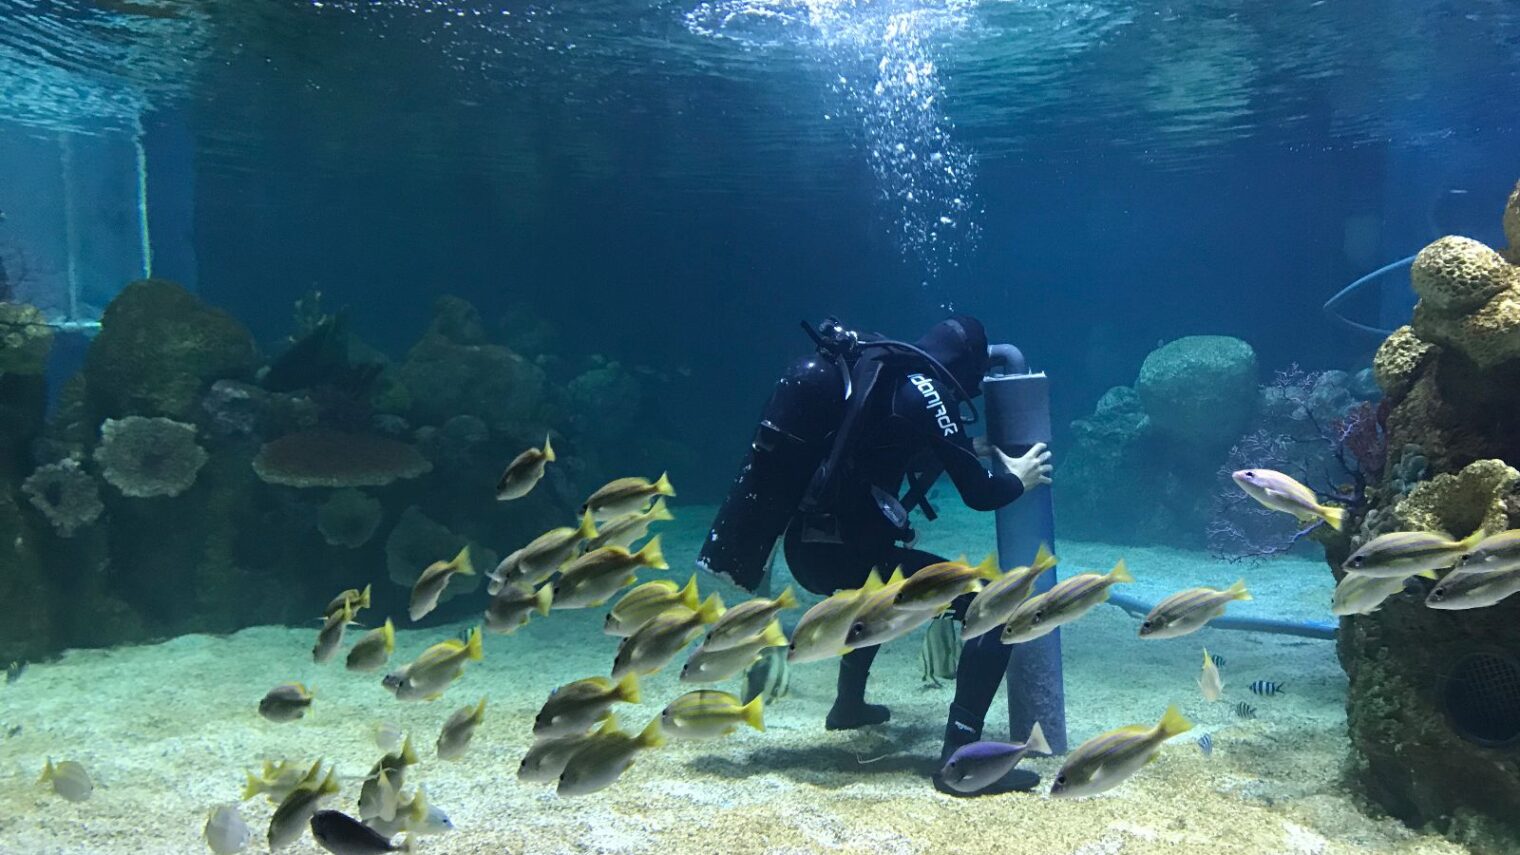 A diver surrounded by fish works away in a tank at the Israel Aquarium. Photo by Yael Lorentci